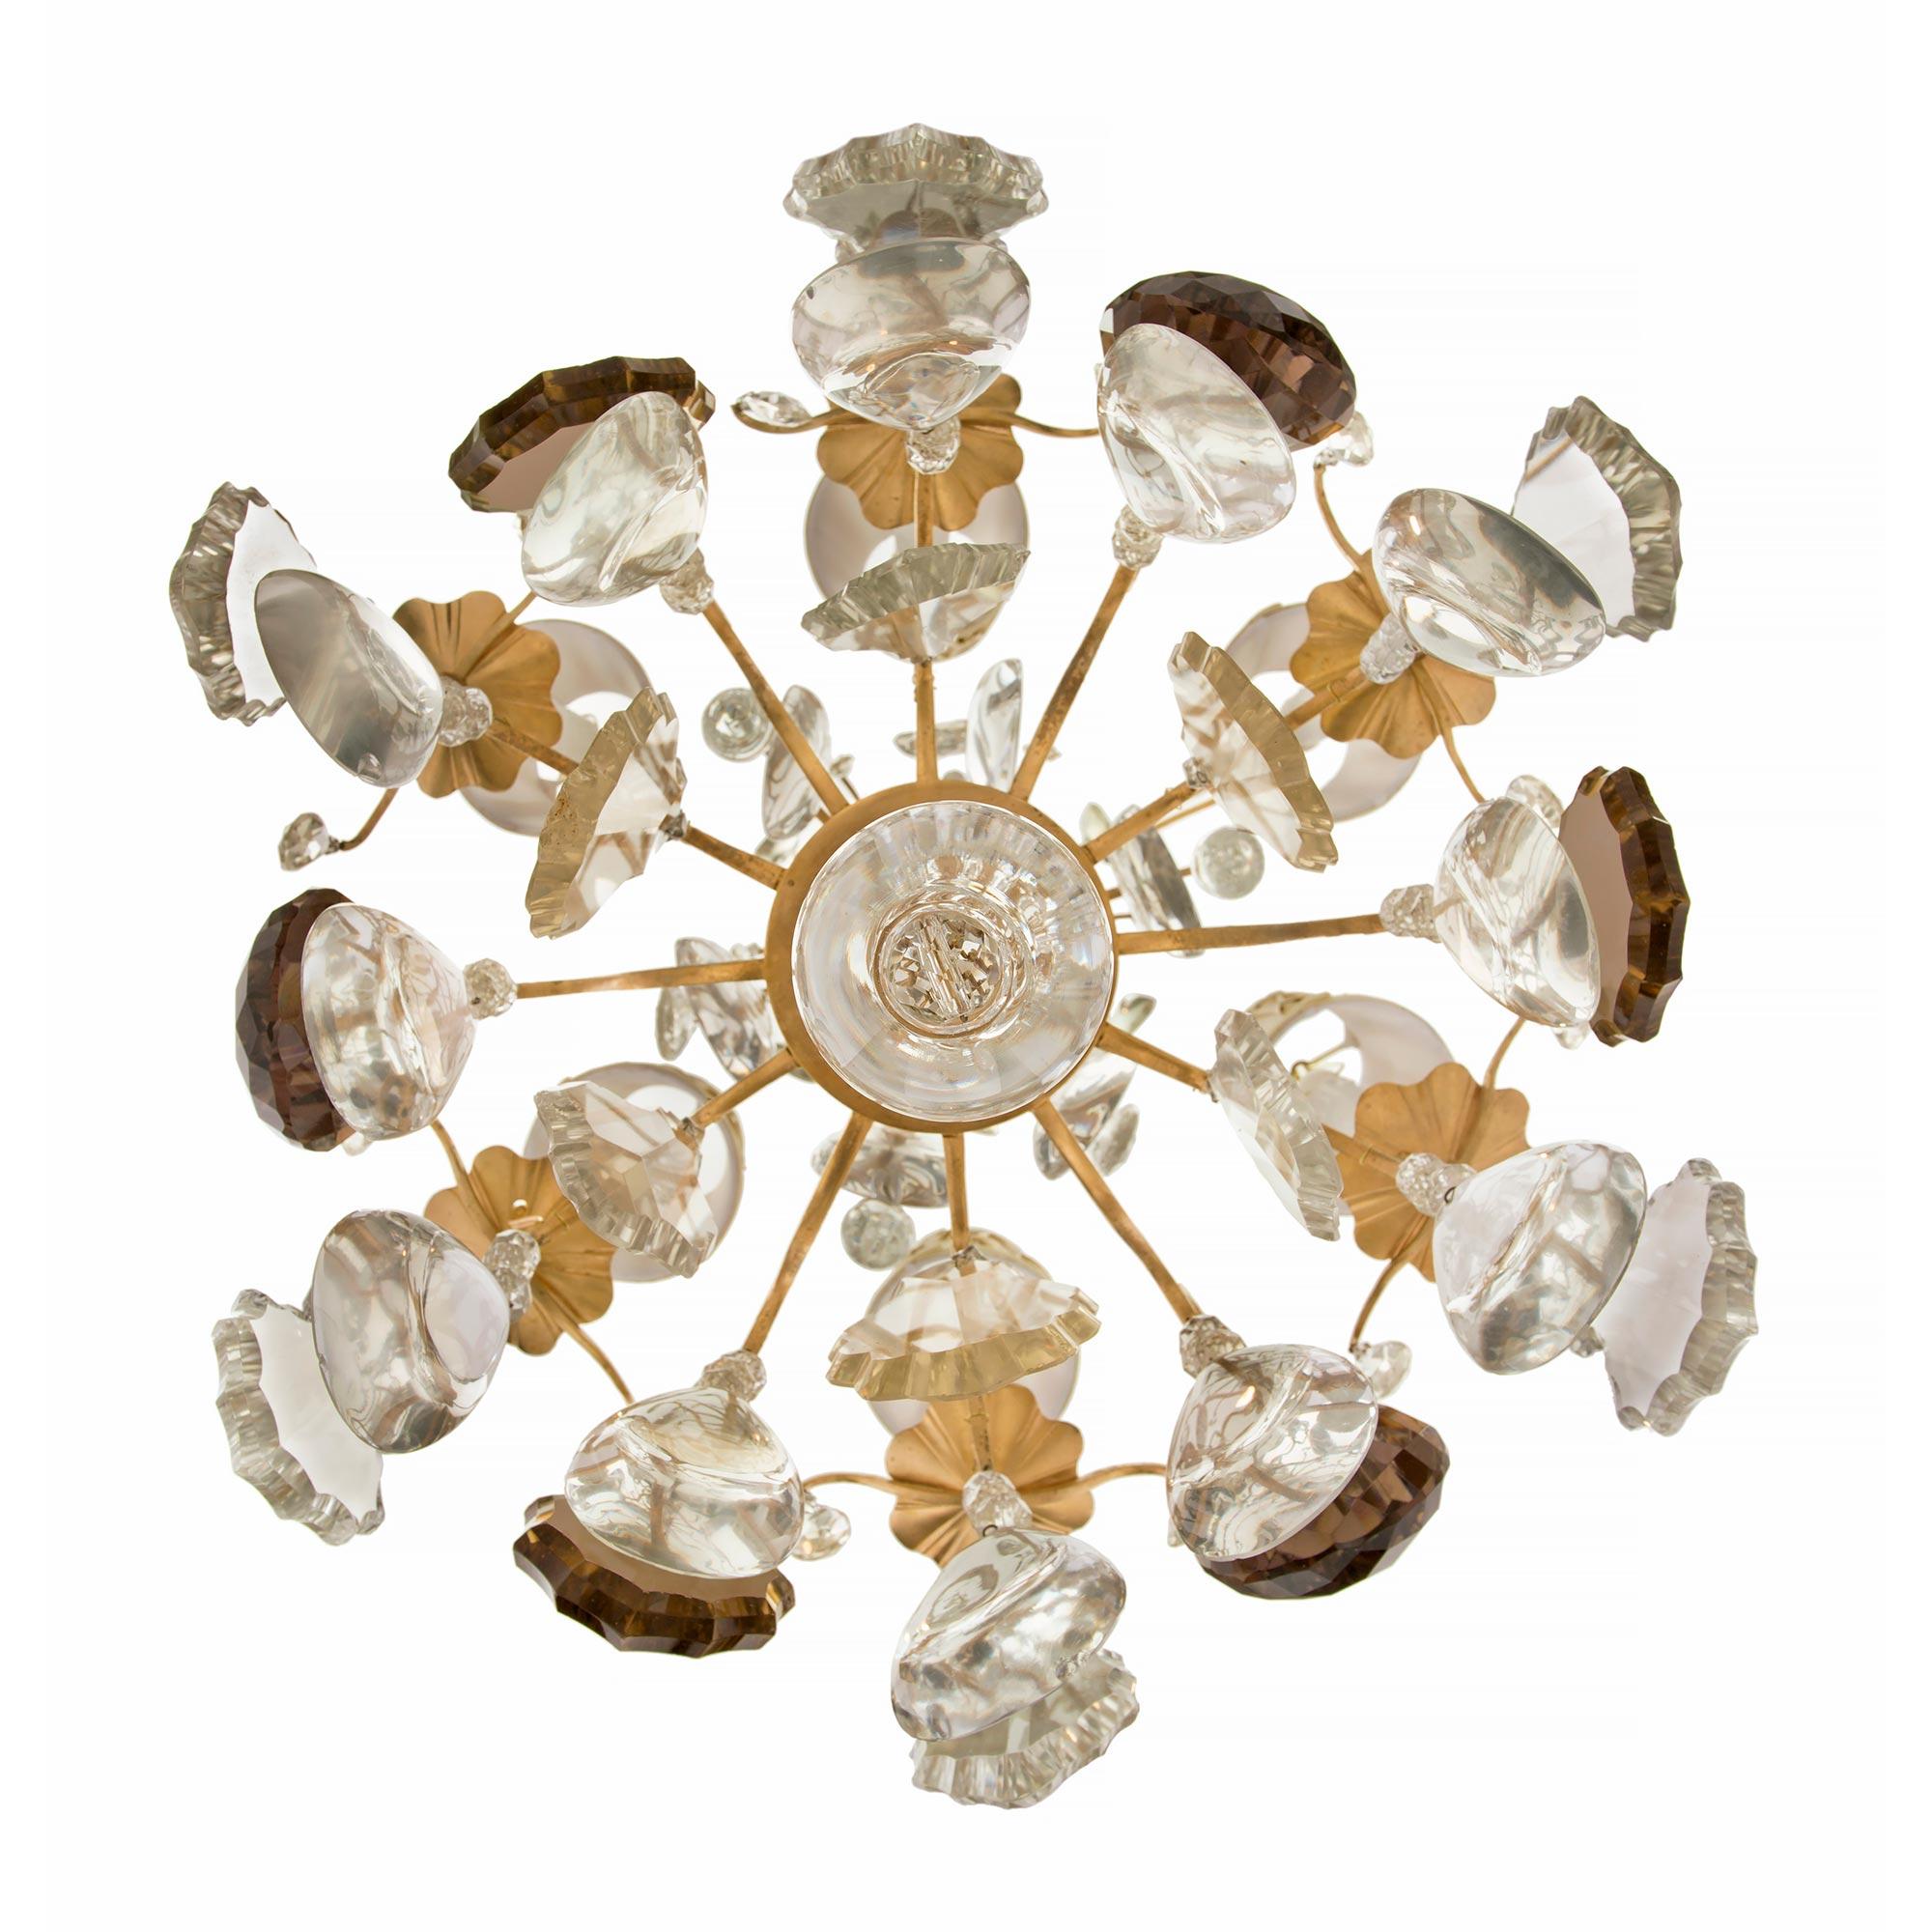 French Mid-19th Century Louis XV Style Baccarat Crystal and Ormolu Chandelier For Sale 3